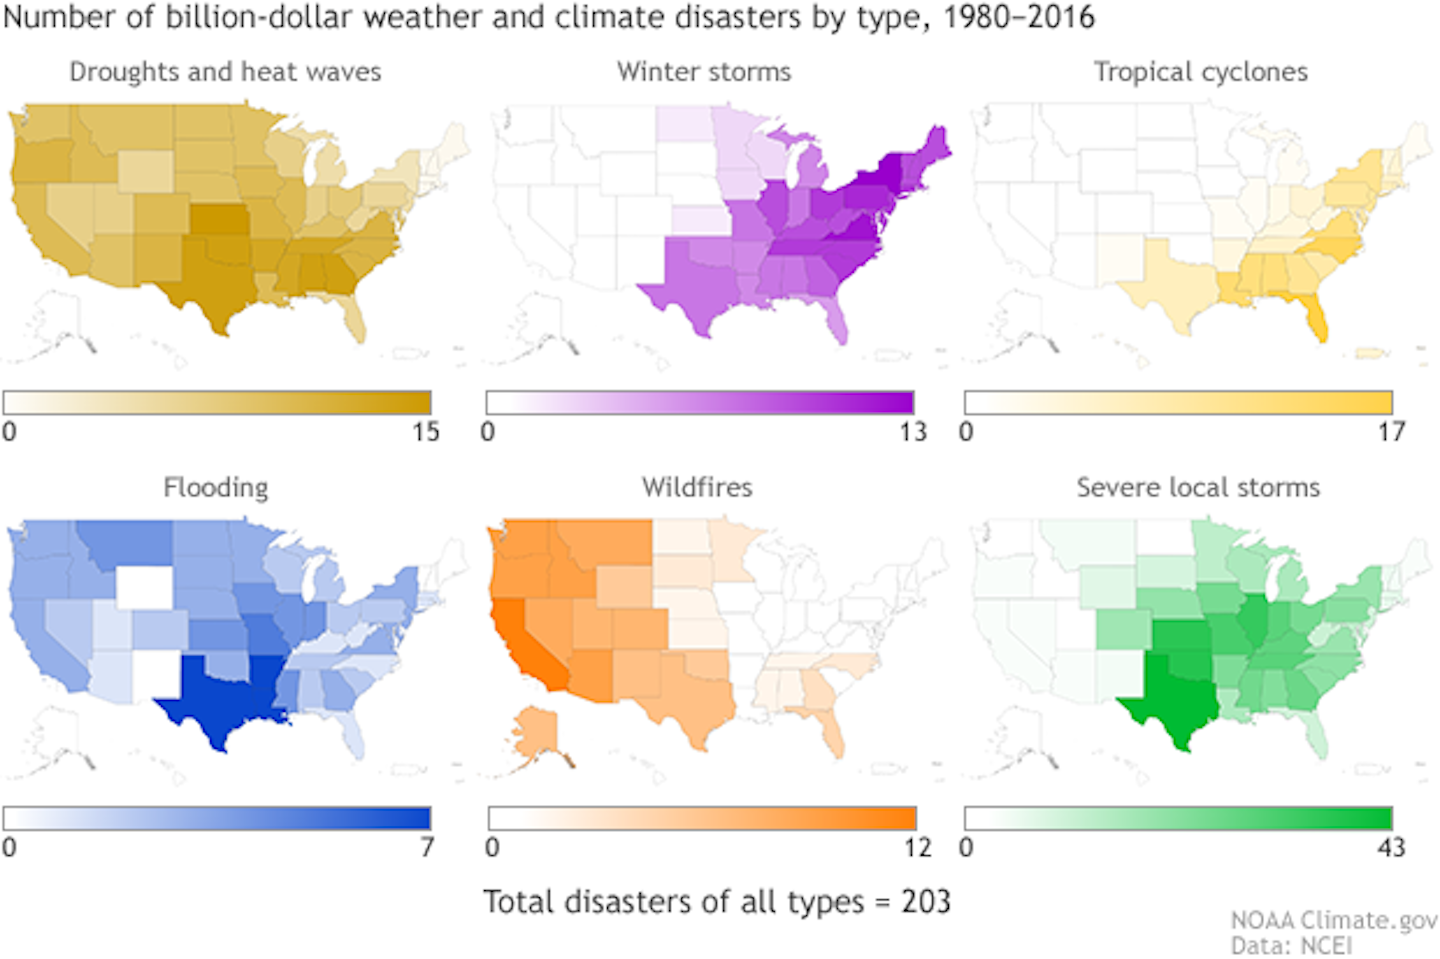 Maps show which states have the most of different types of disasters, such as tropical storms and wildfires